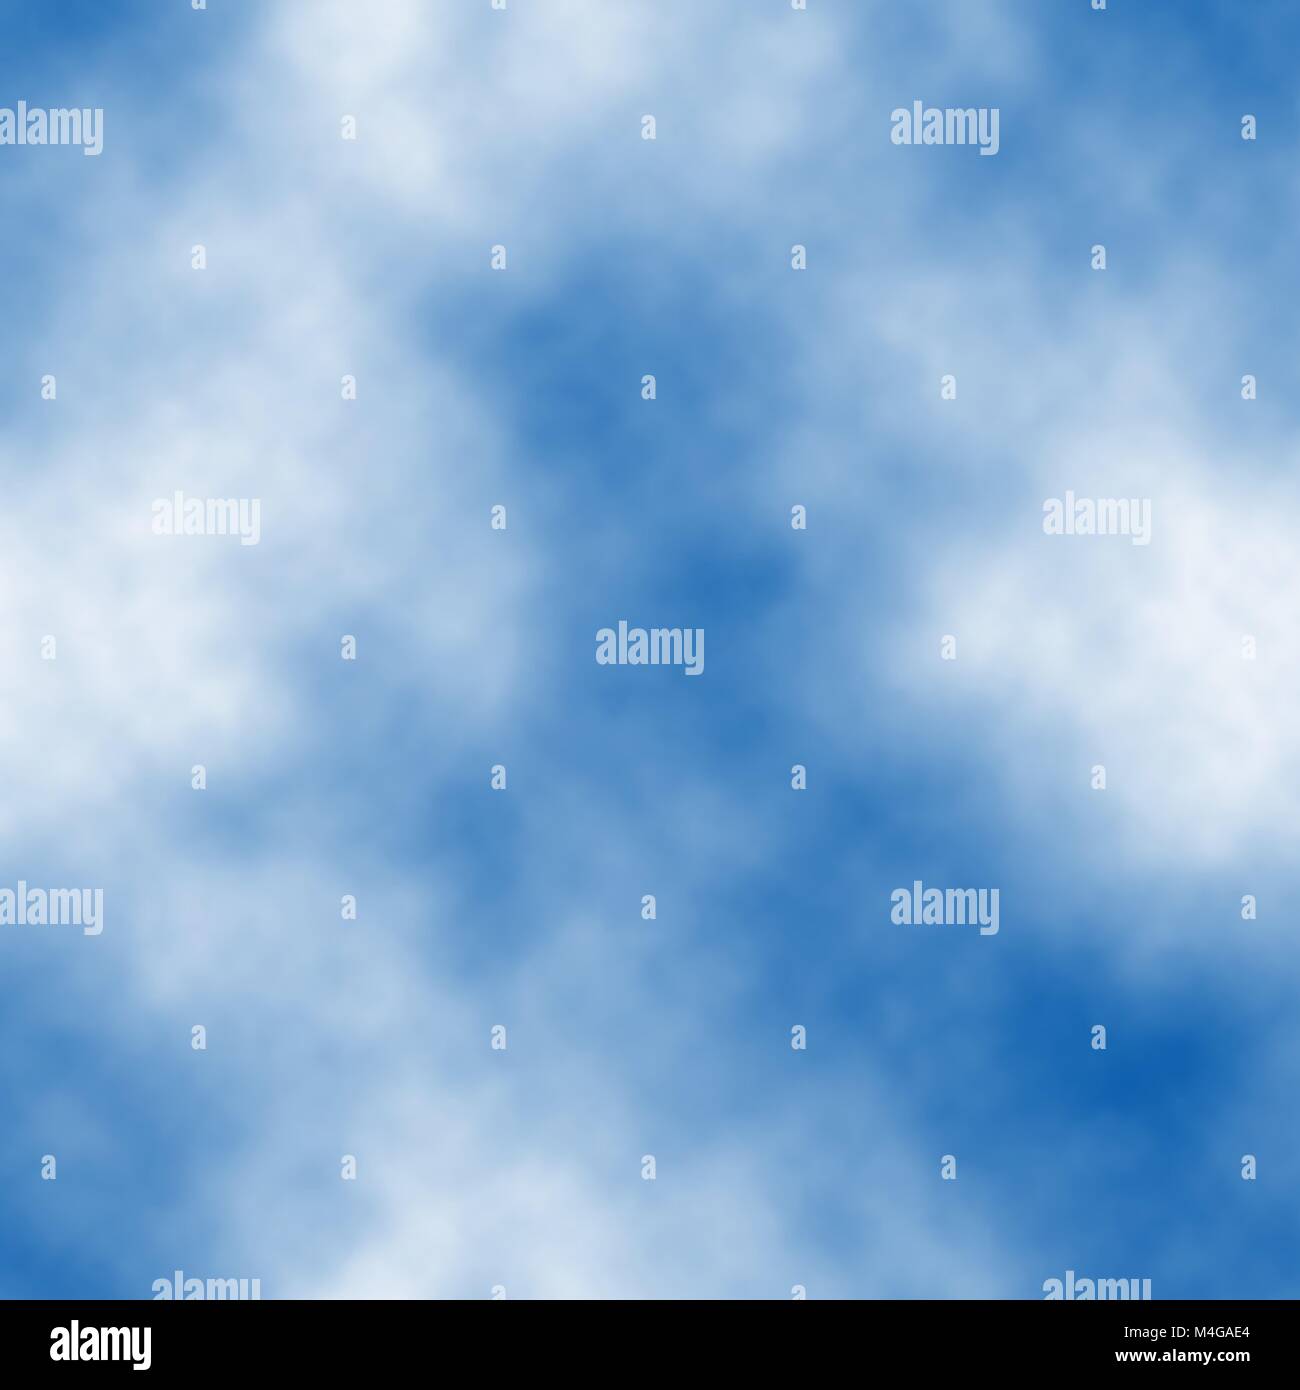 Seamless vector tile of white clouds in a blue sky made using a gradient mesh Stock Vector